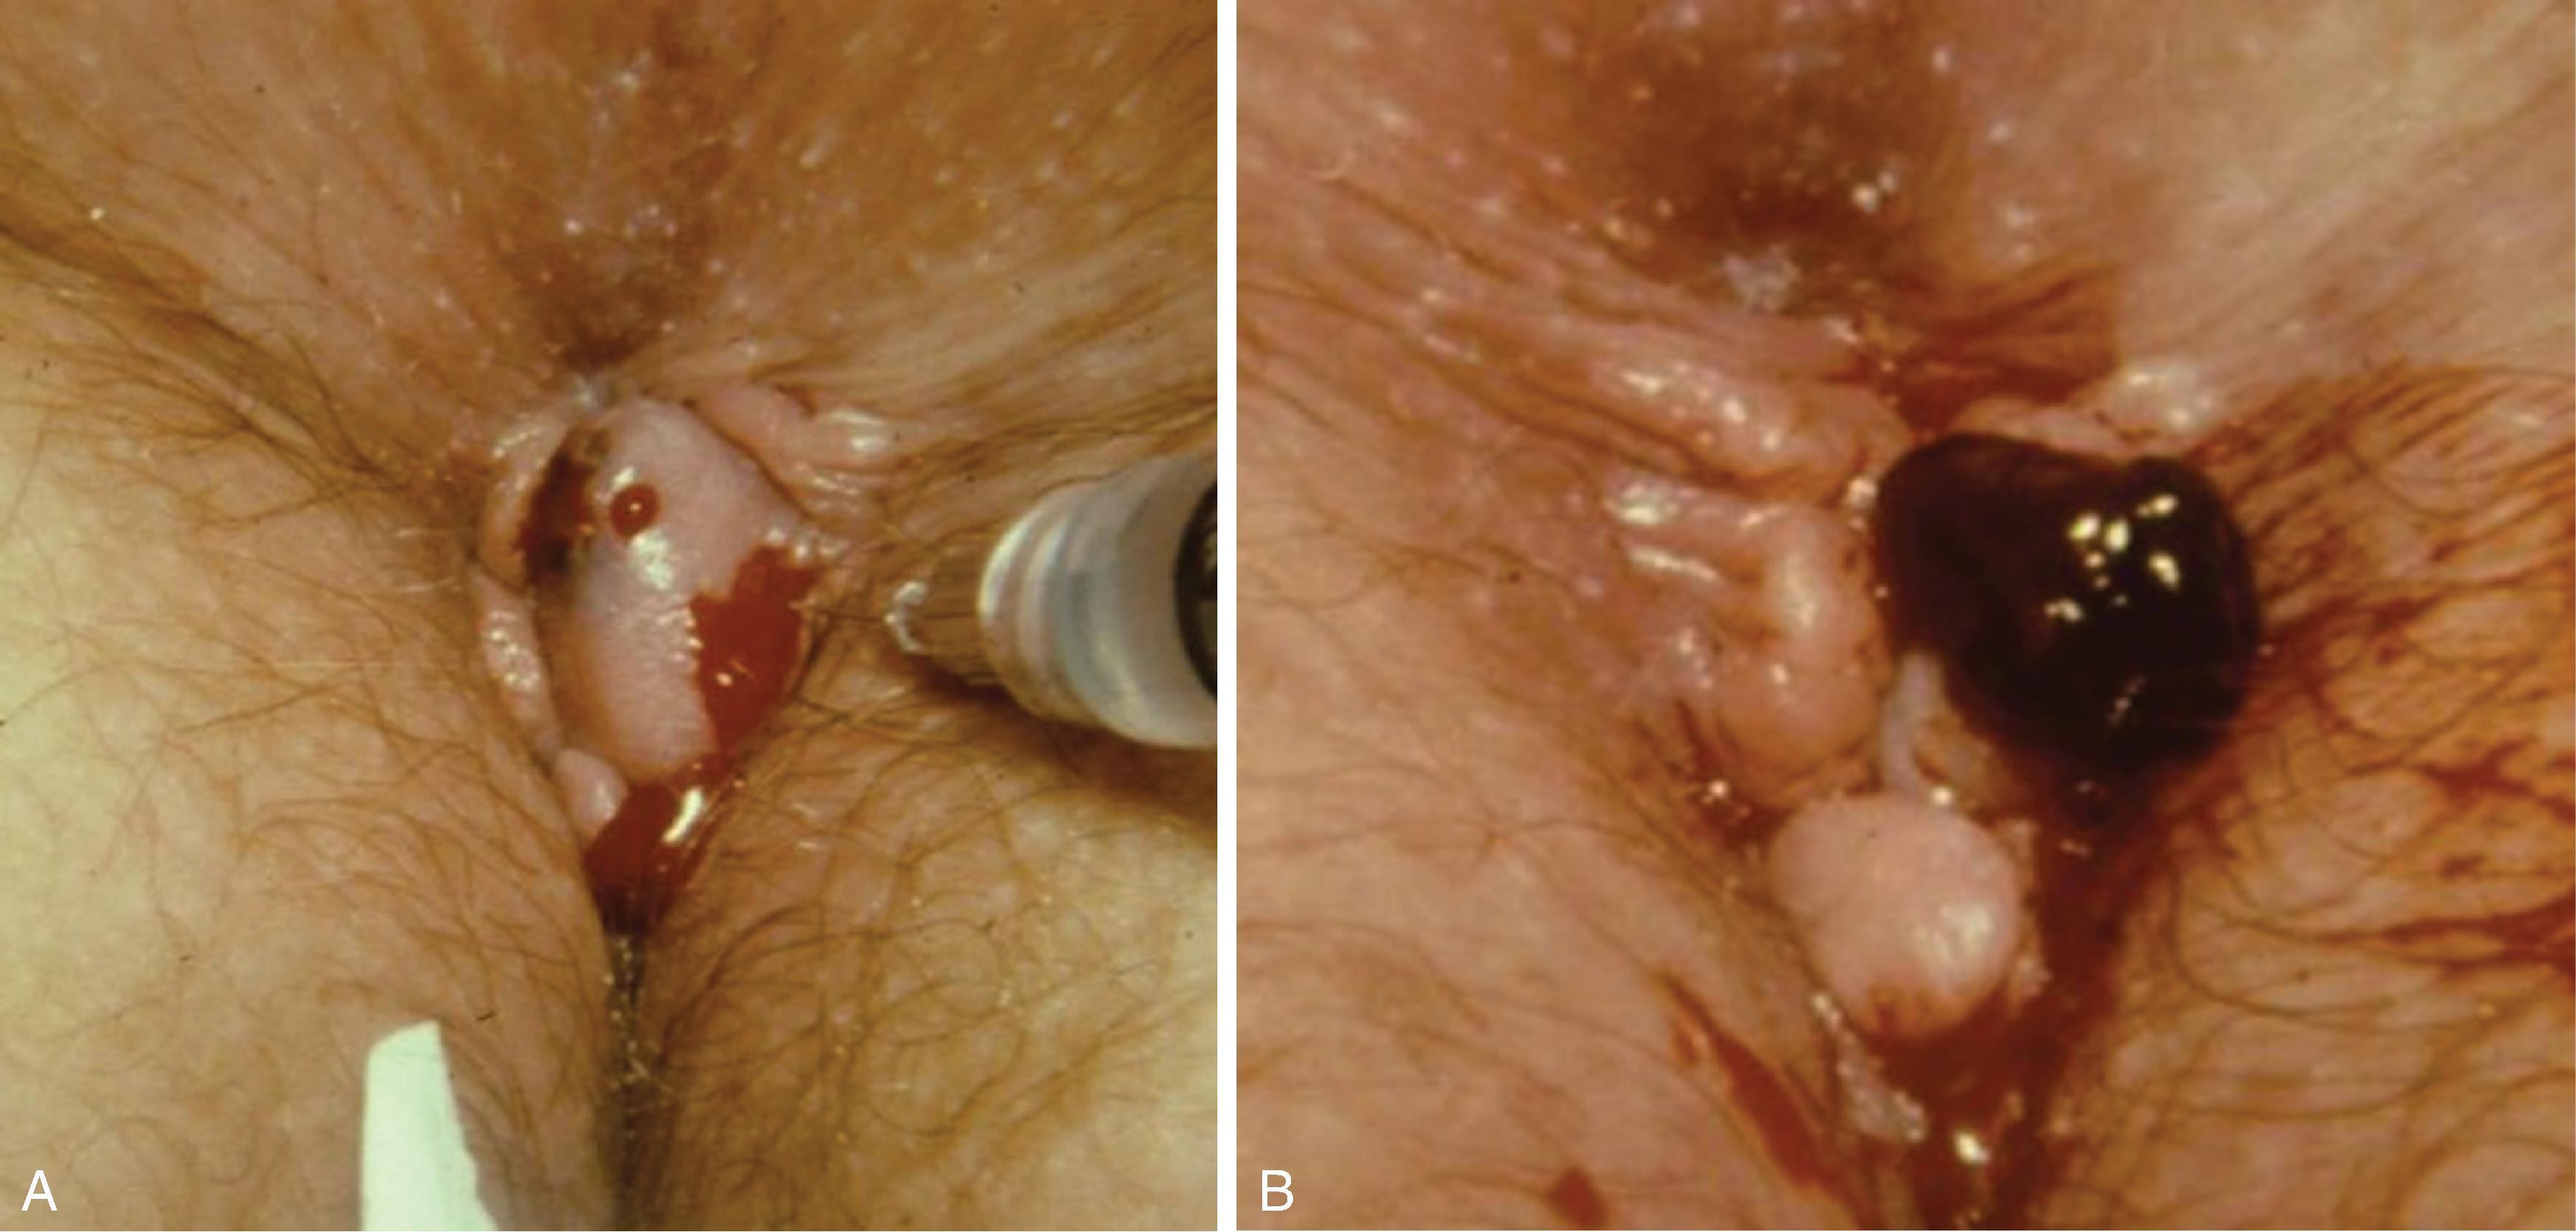 FIG. 7, Acute thrombosed external hemorrhoid. (A) Single thrombosed external hemorrhoid. (B) Clot excised with overlying.